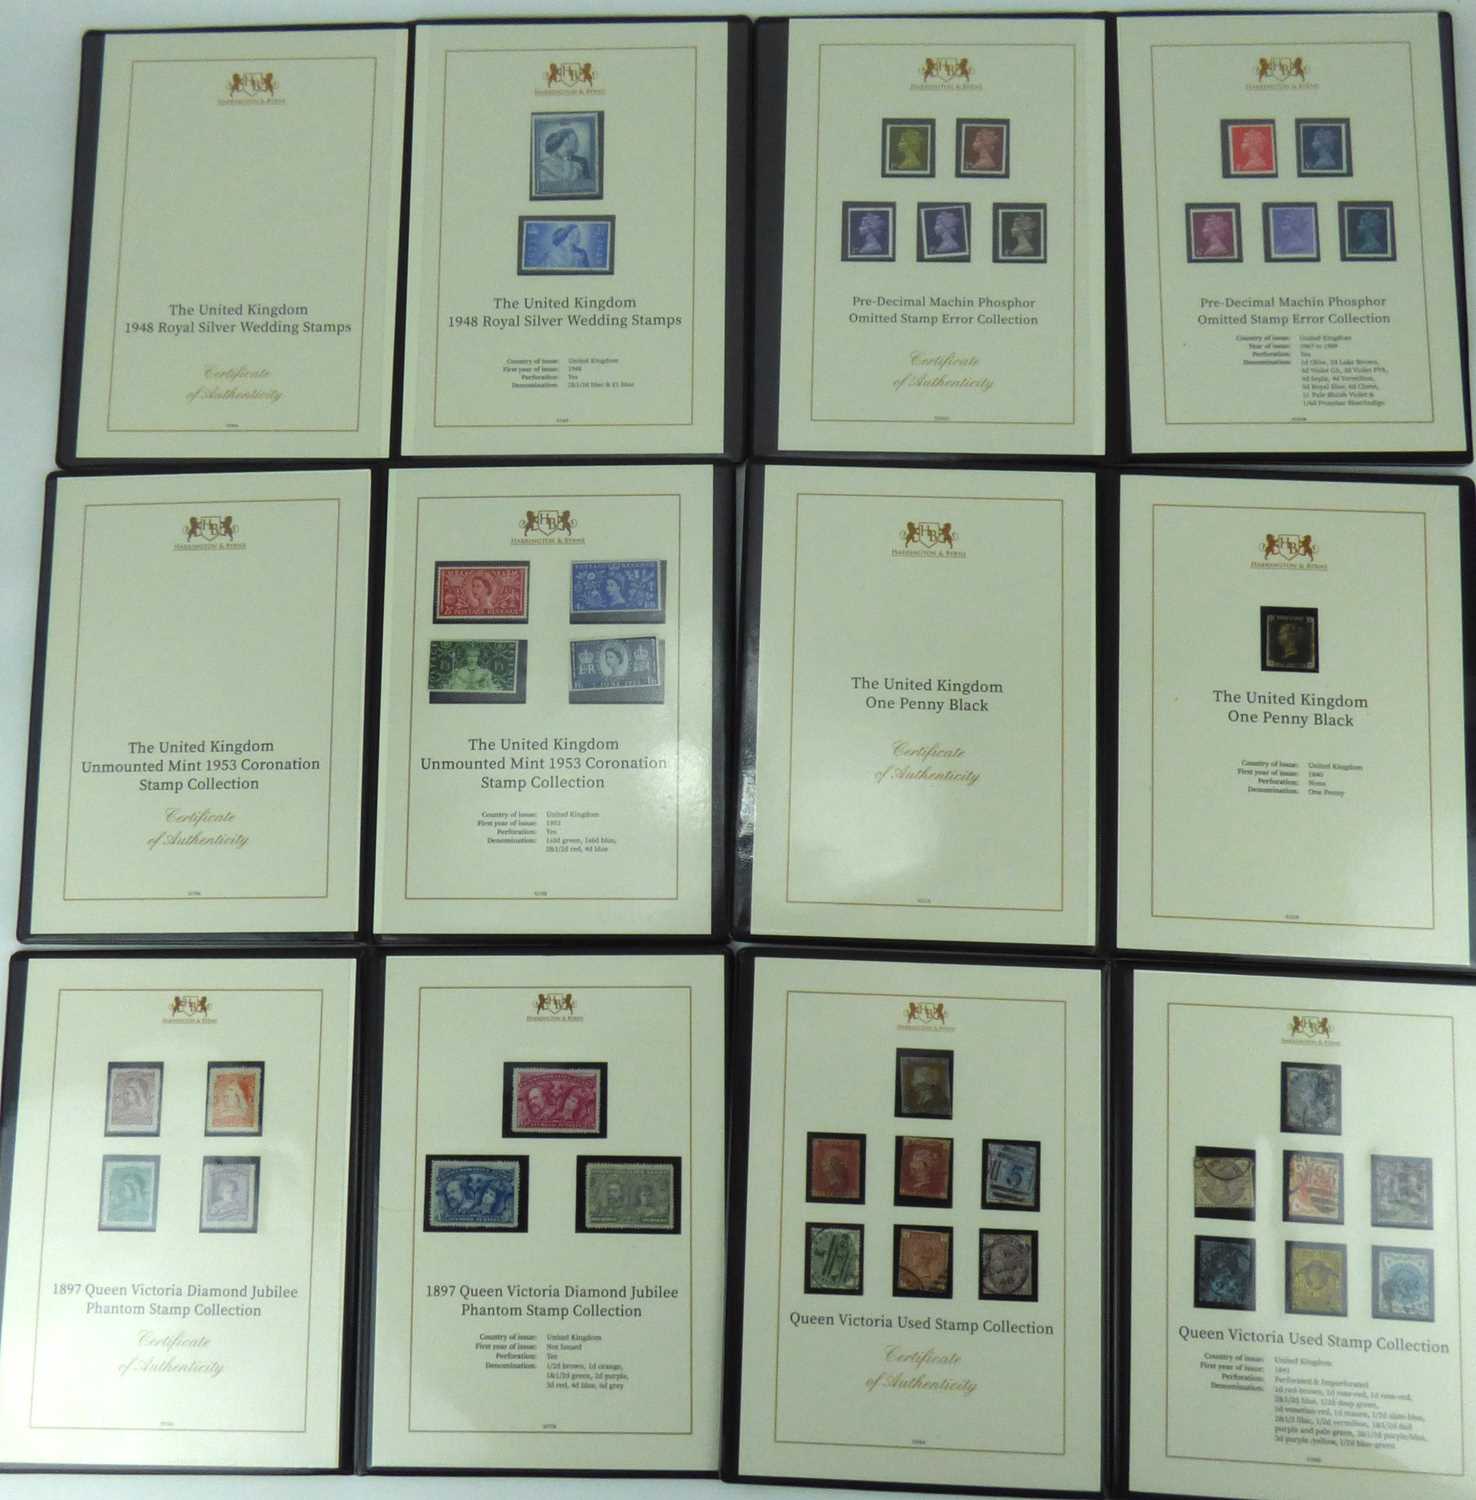 HARRINGTON & BYRNE; six folders containing speciality stamp collections, comprising 'The United